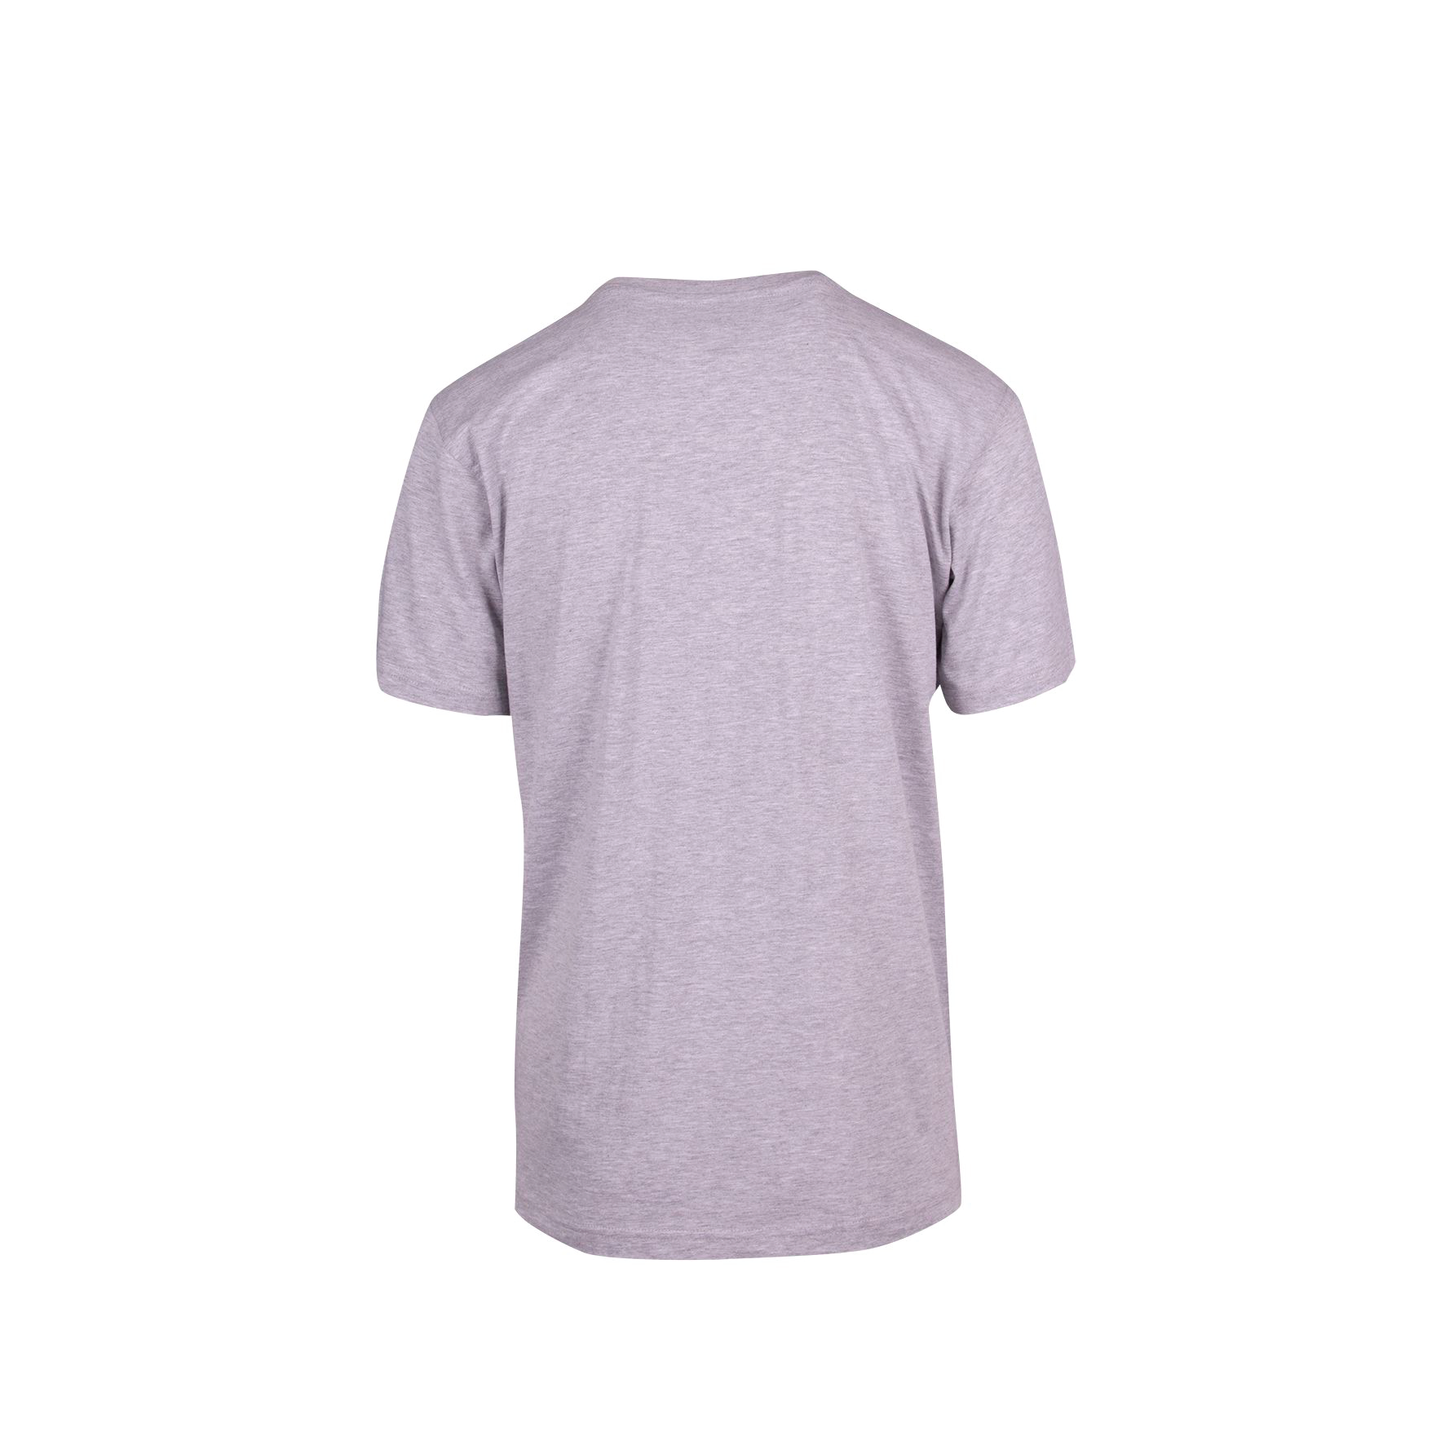 WINGS SUPPORTER TEE - GREY MARLE